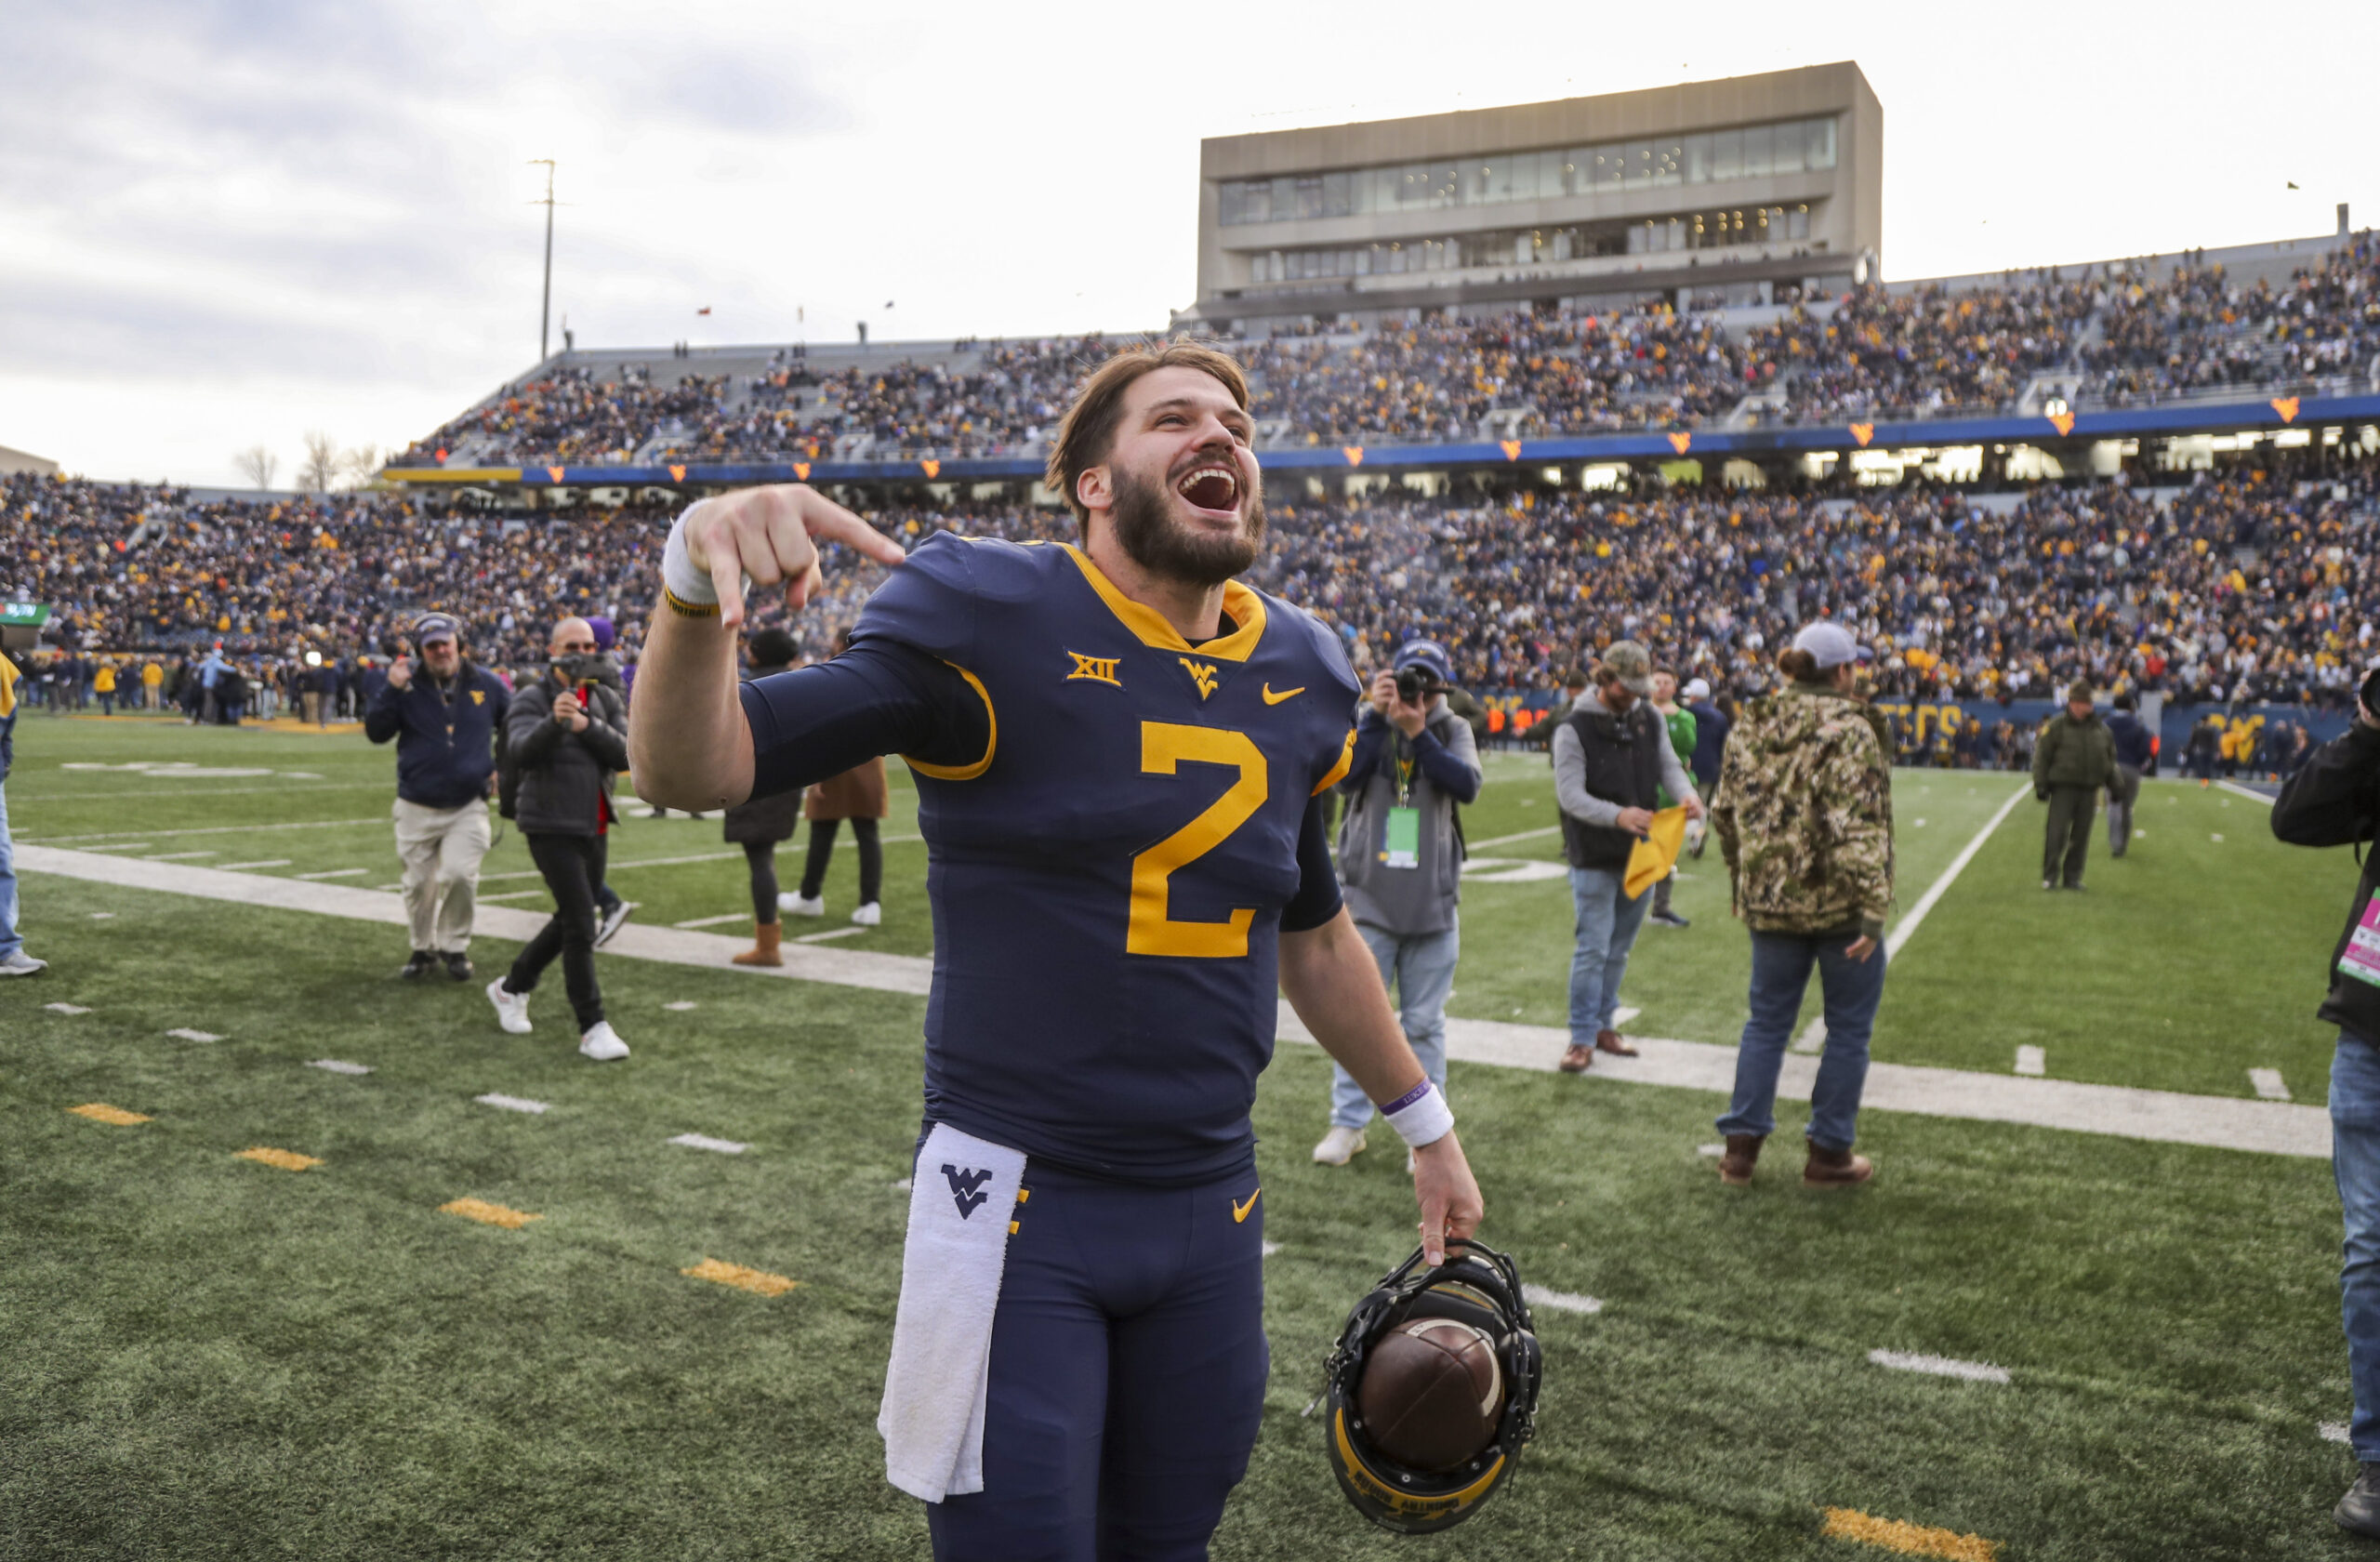 West Virginia tops Texas 3123, maintains hope of reaching bowl game